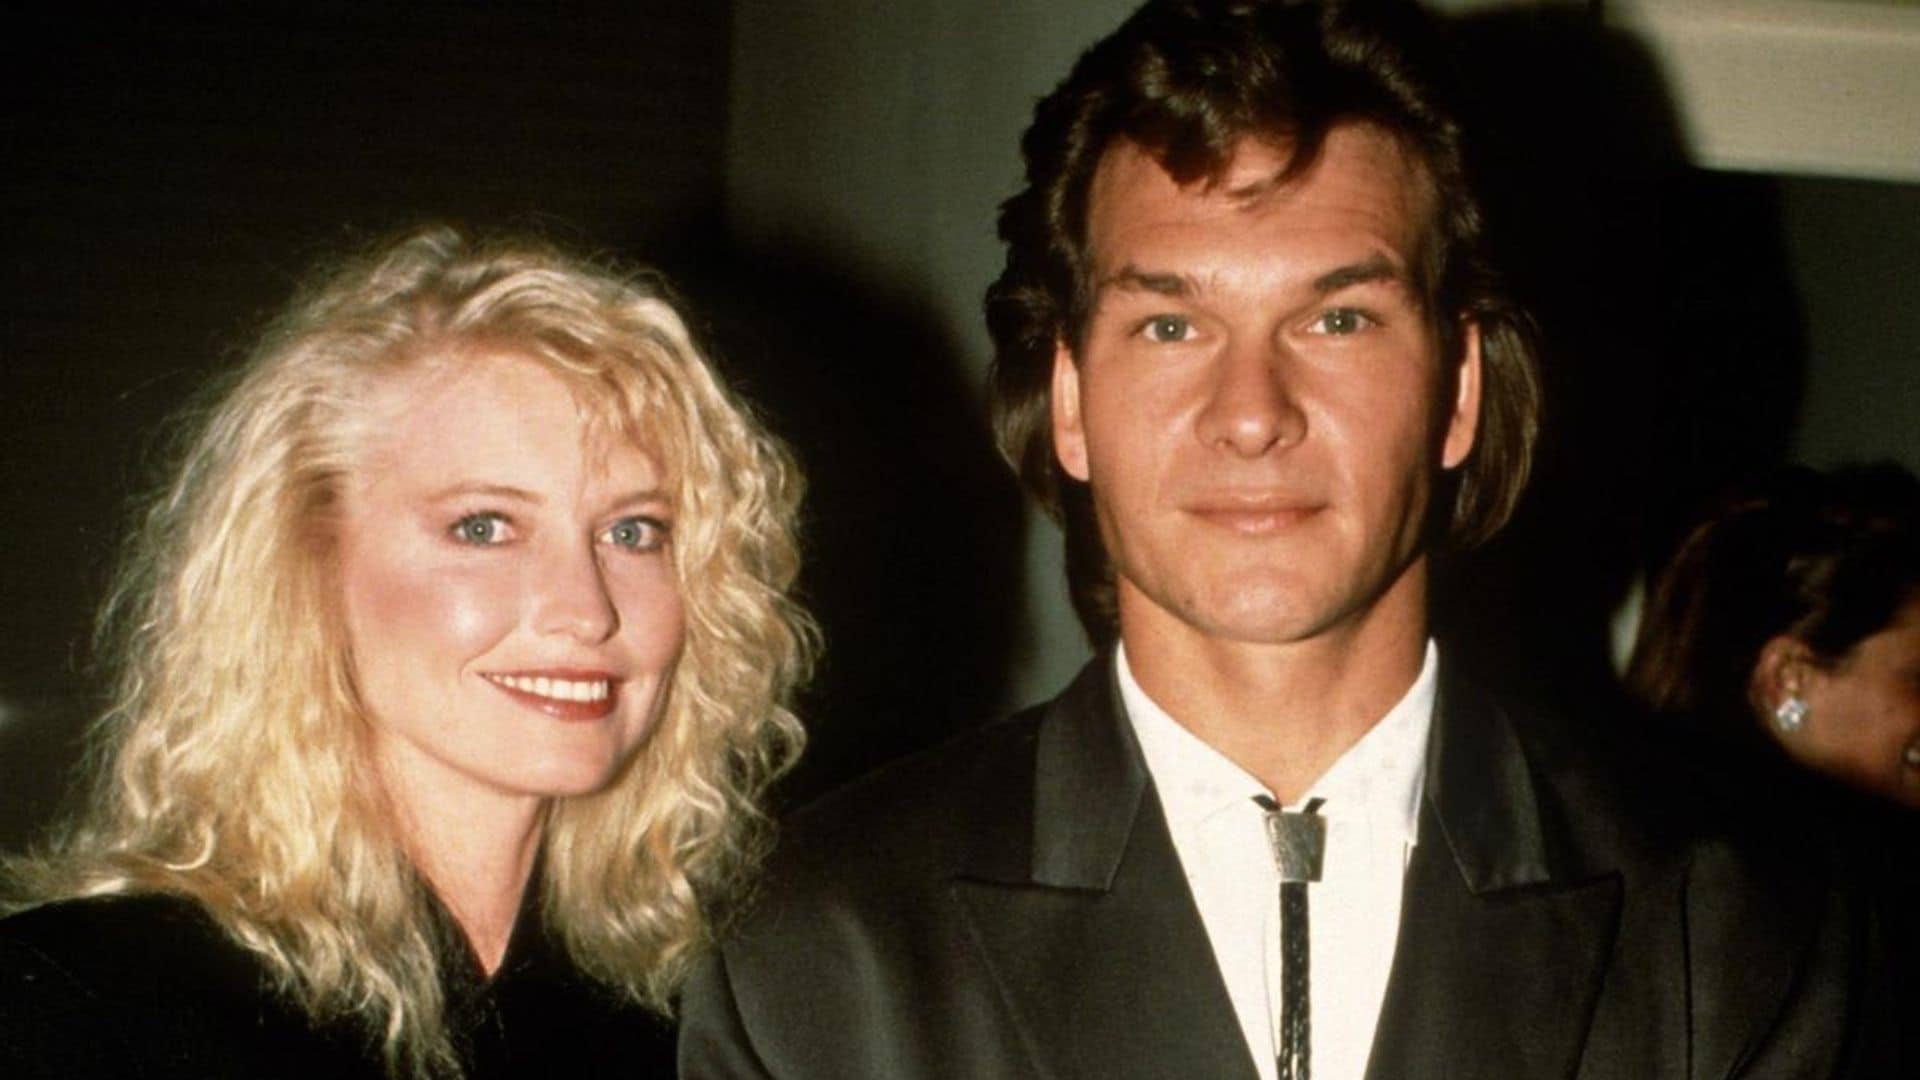 Patrick Swayze’s widow shares heartbreaking moment before his death; ‘I want to live’